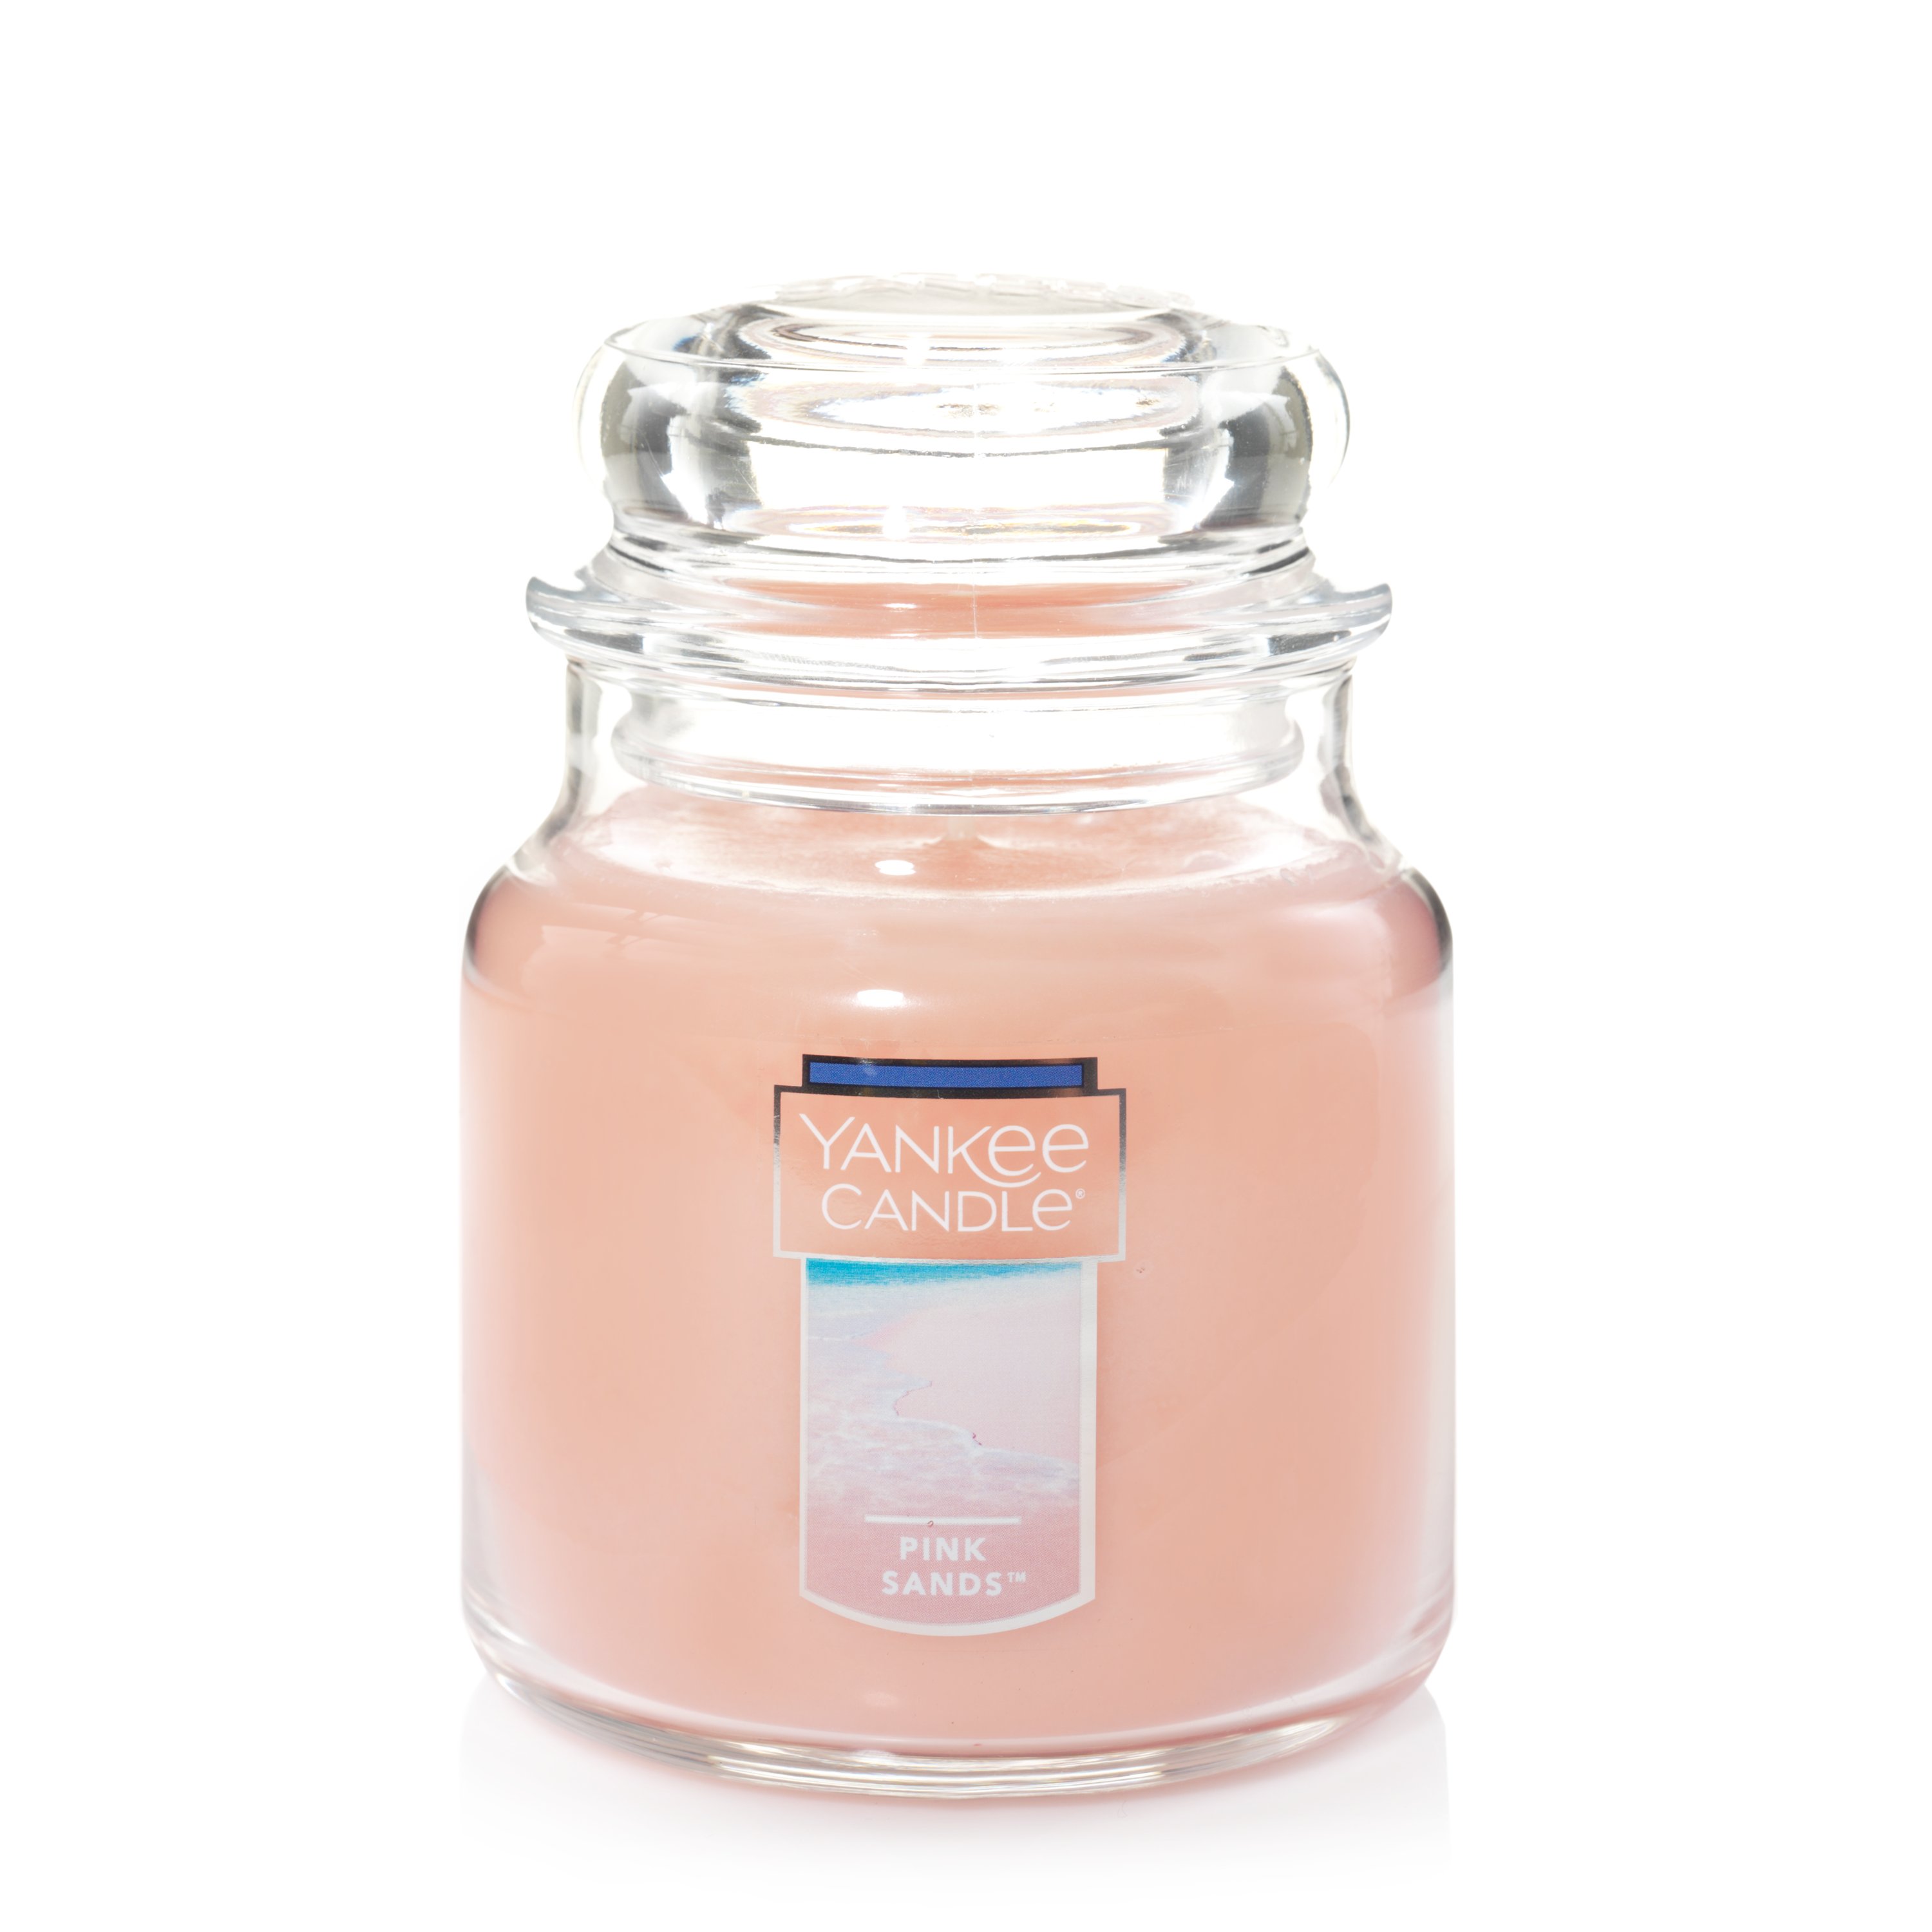 Yankee Candle Pink Sands Scented